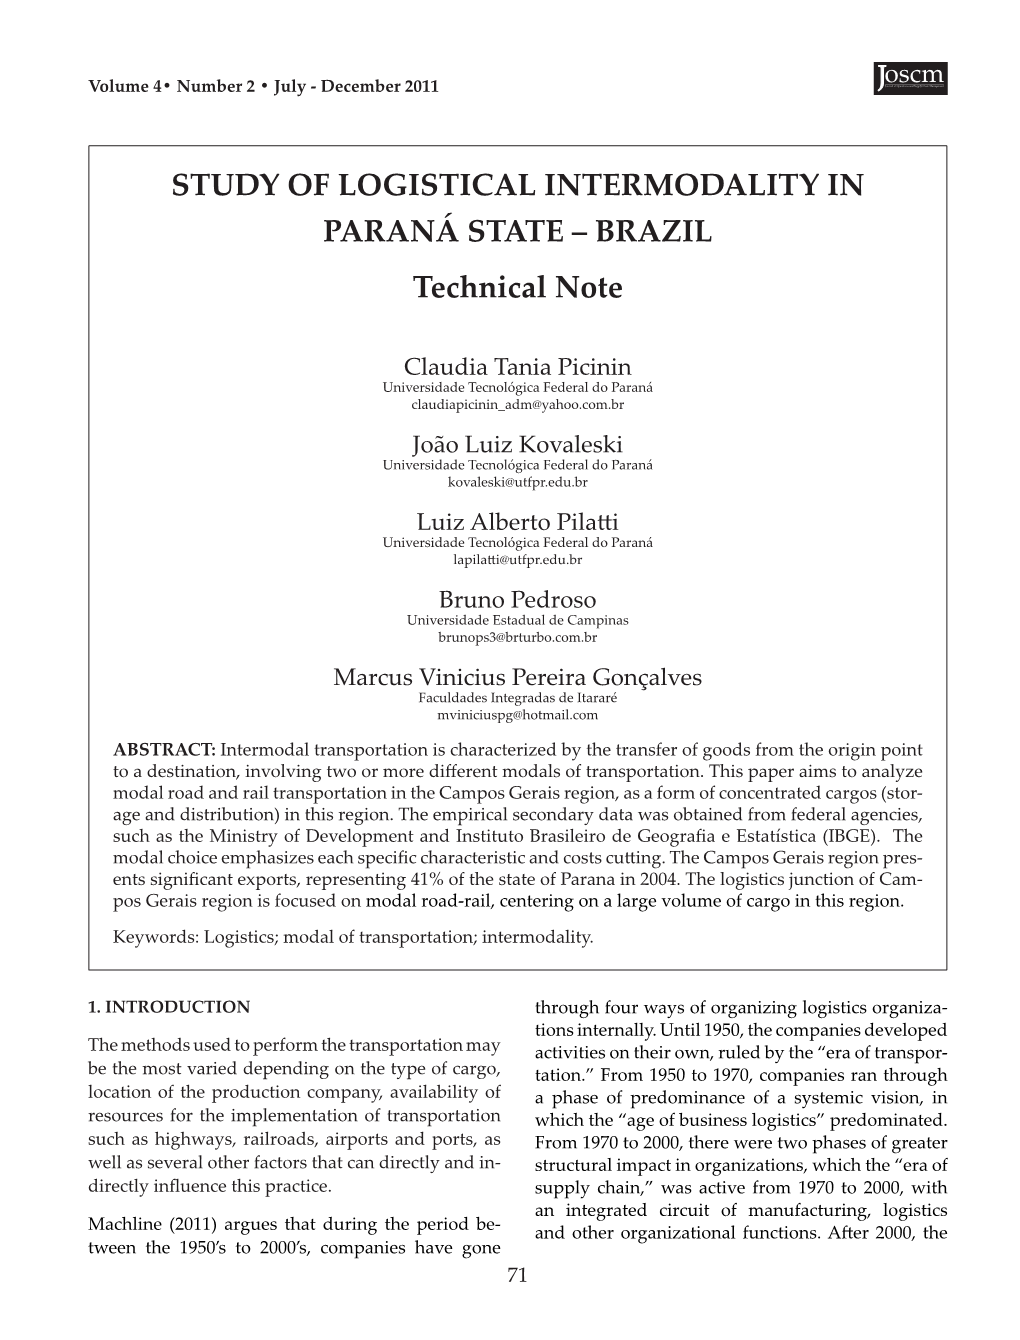 STUDY of LOGISTICAL INTERMODALITY in PARANÁ STATE – BRAZIL Technical Note